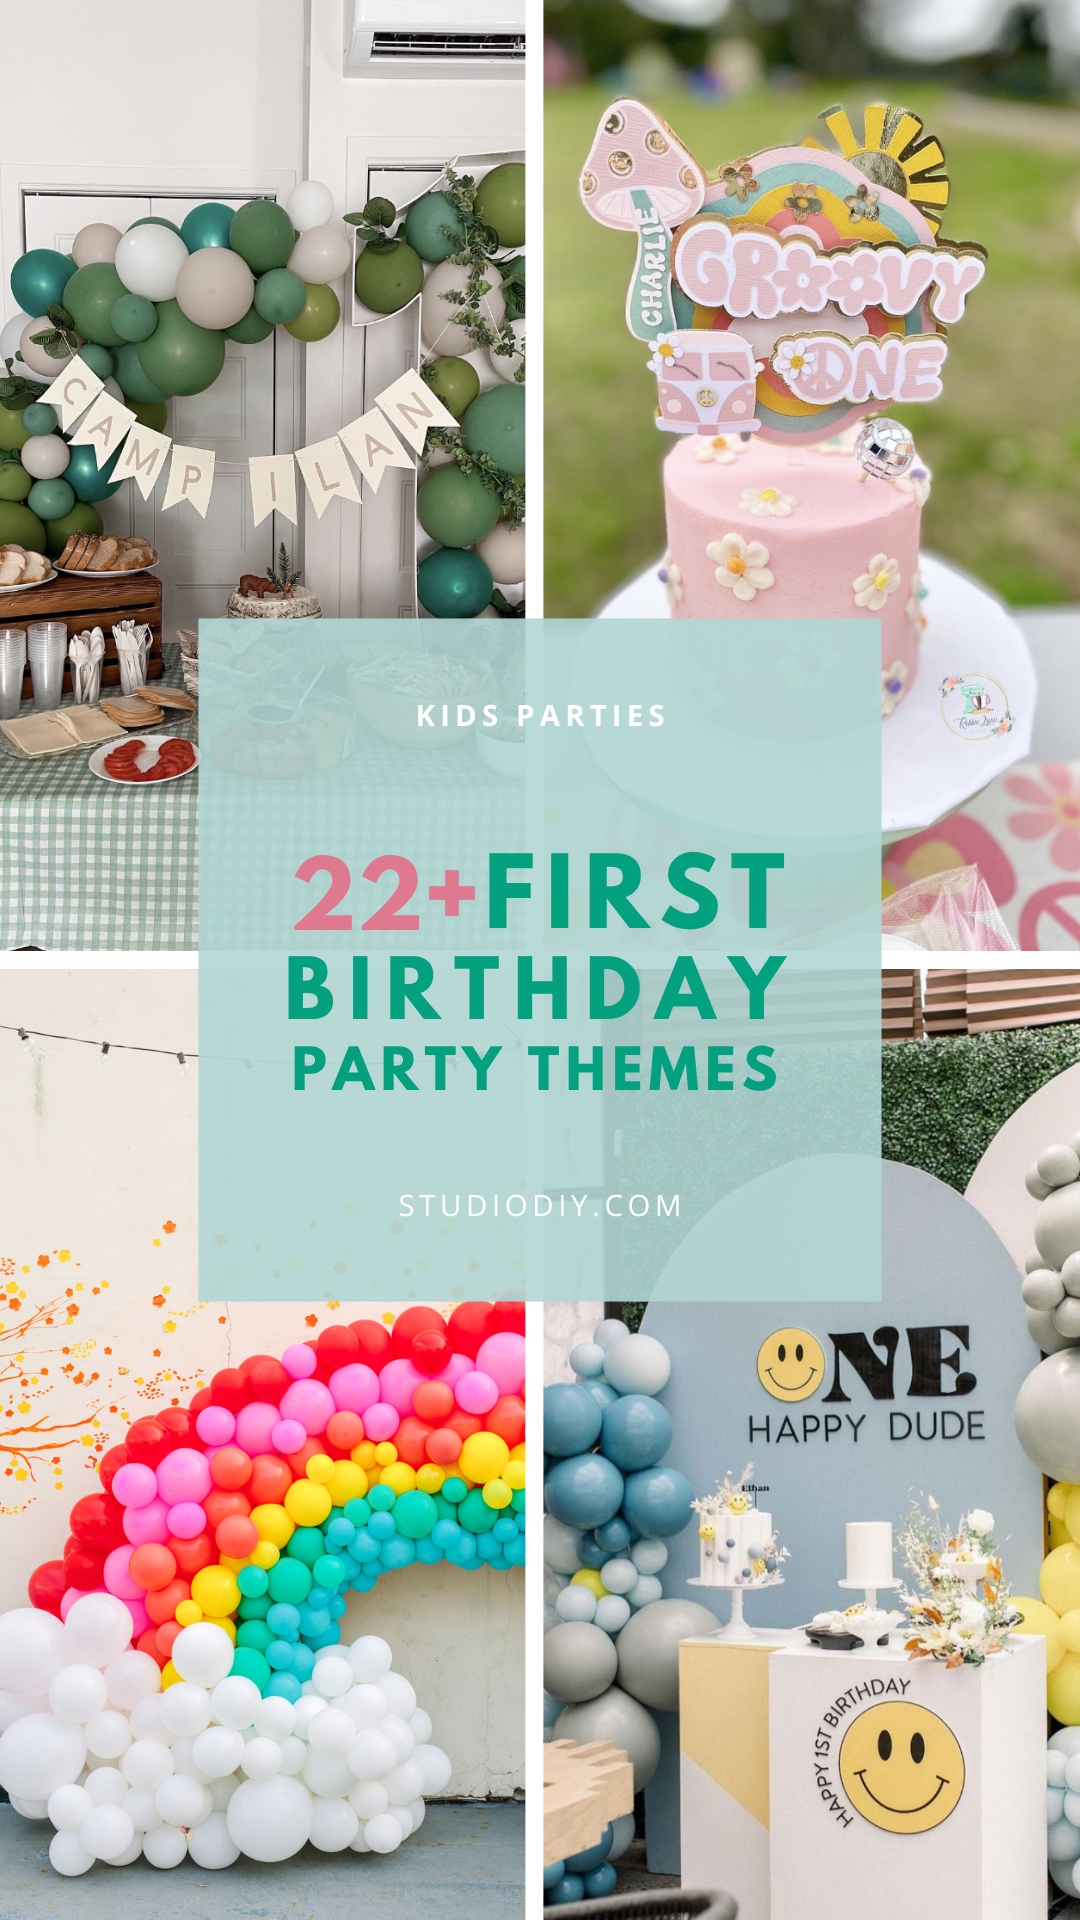 40+ Fun First Birthday Party Theme Ideas for Boys and Girls - In